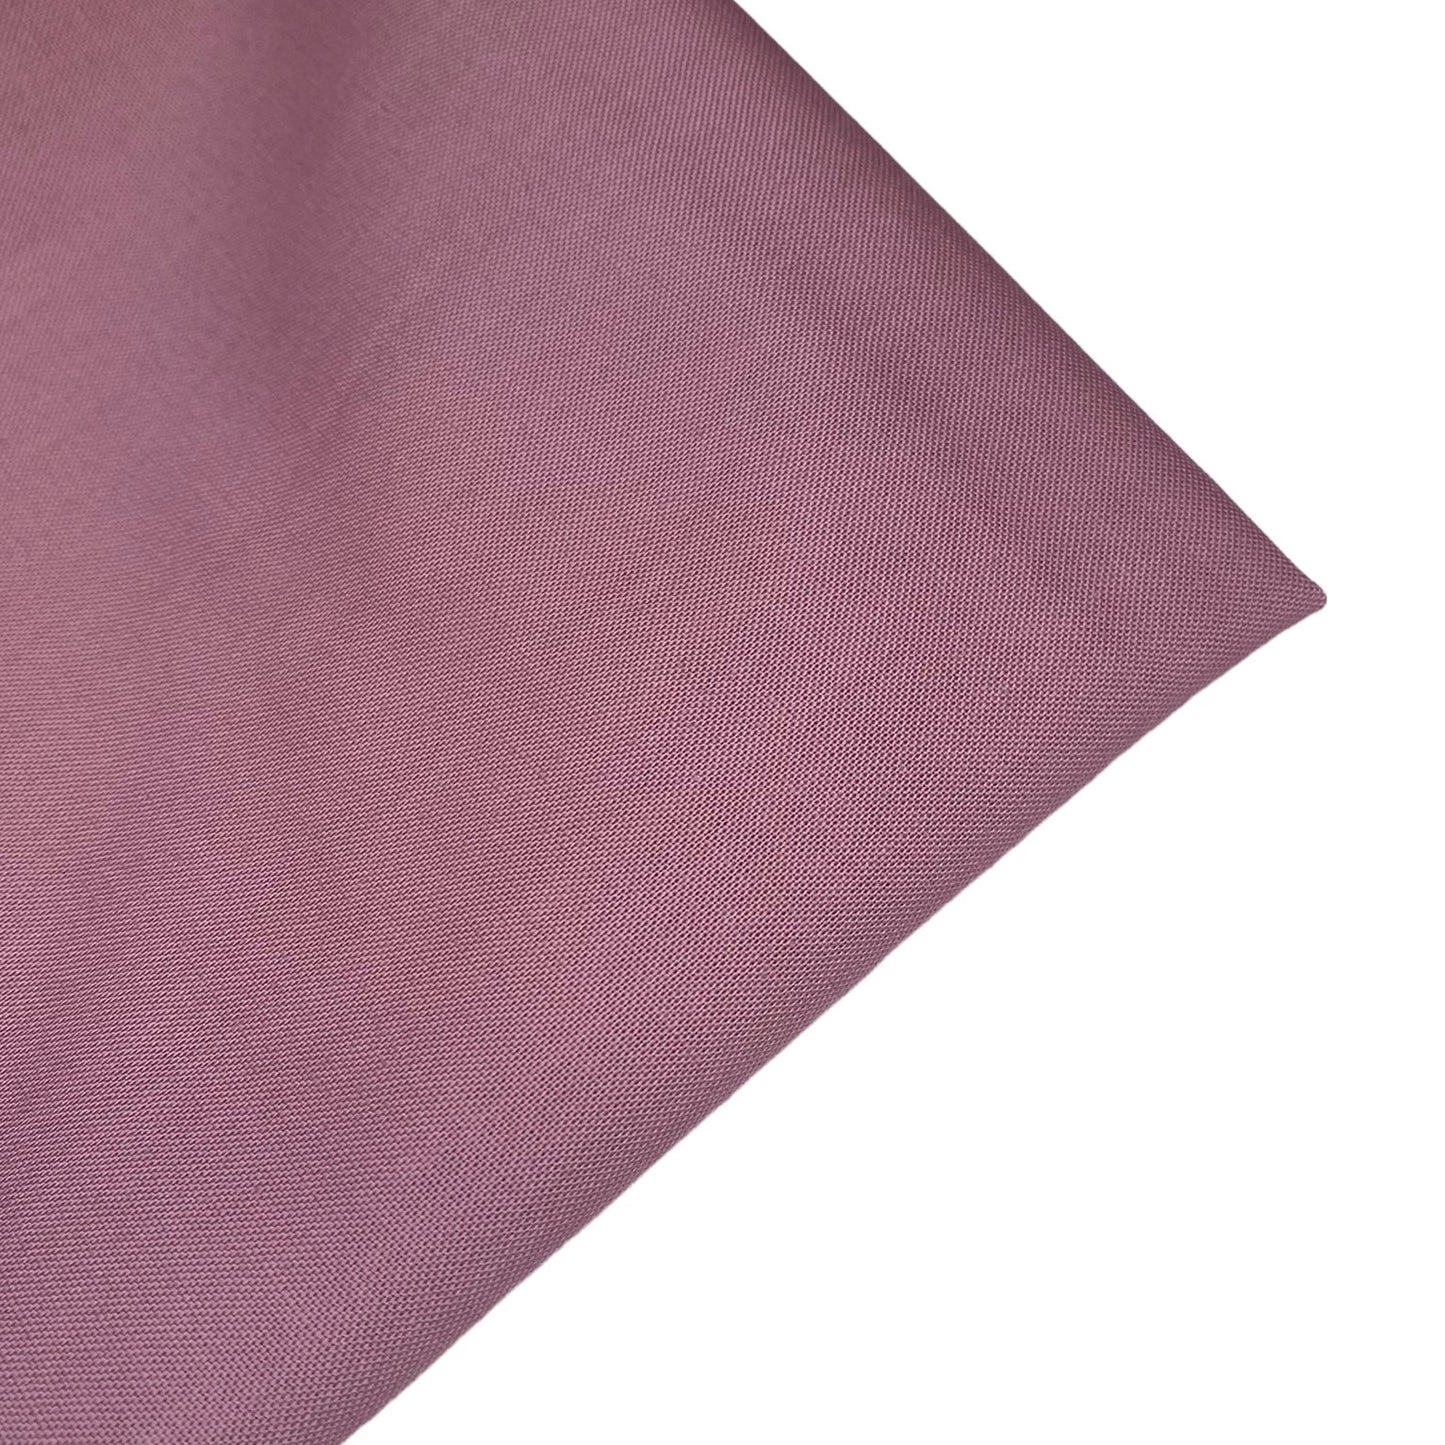 Cotton Broadcloth - Brown